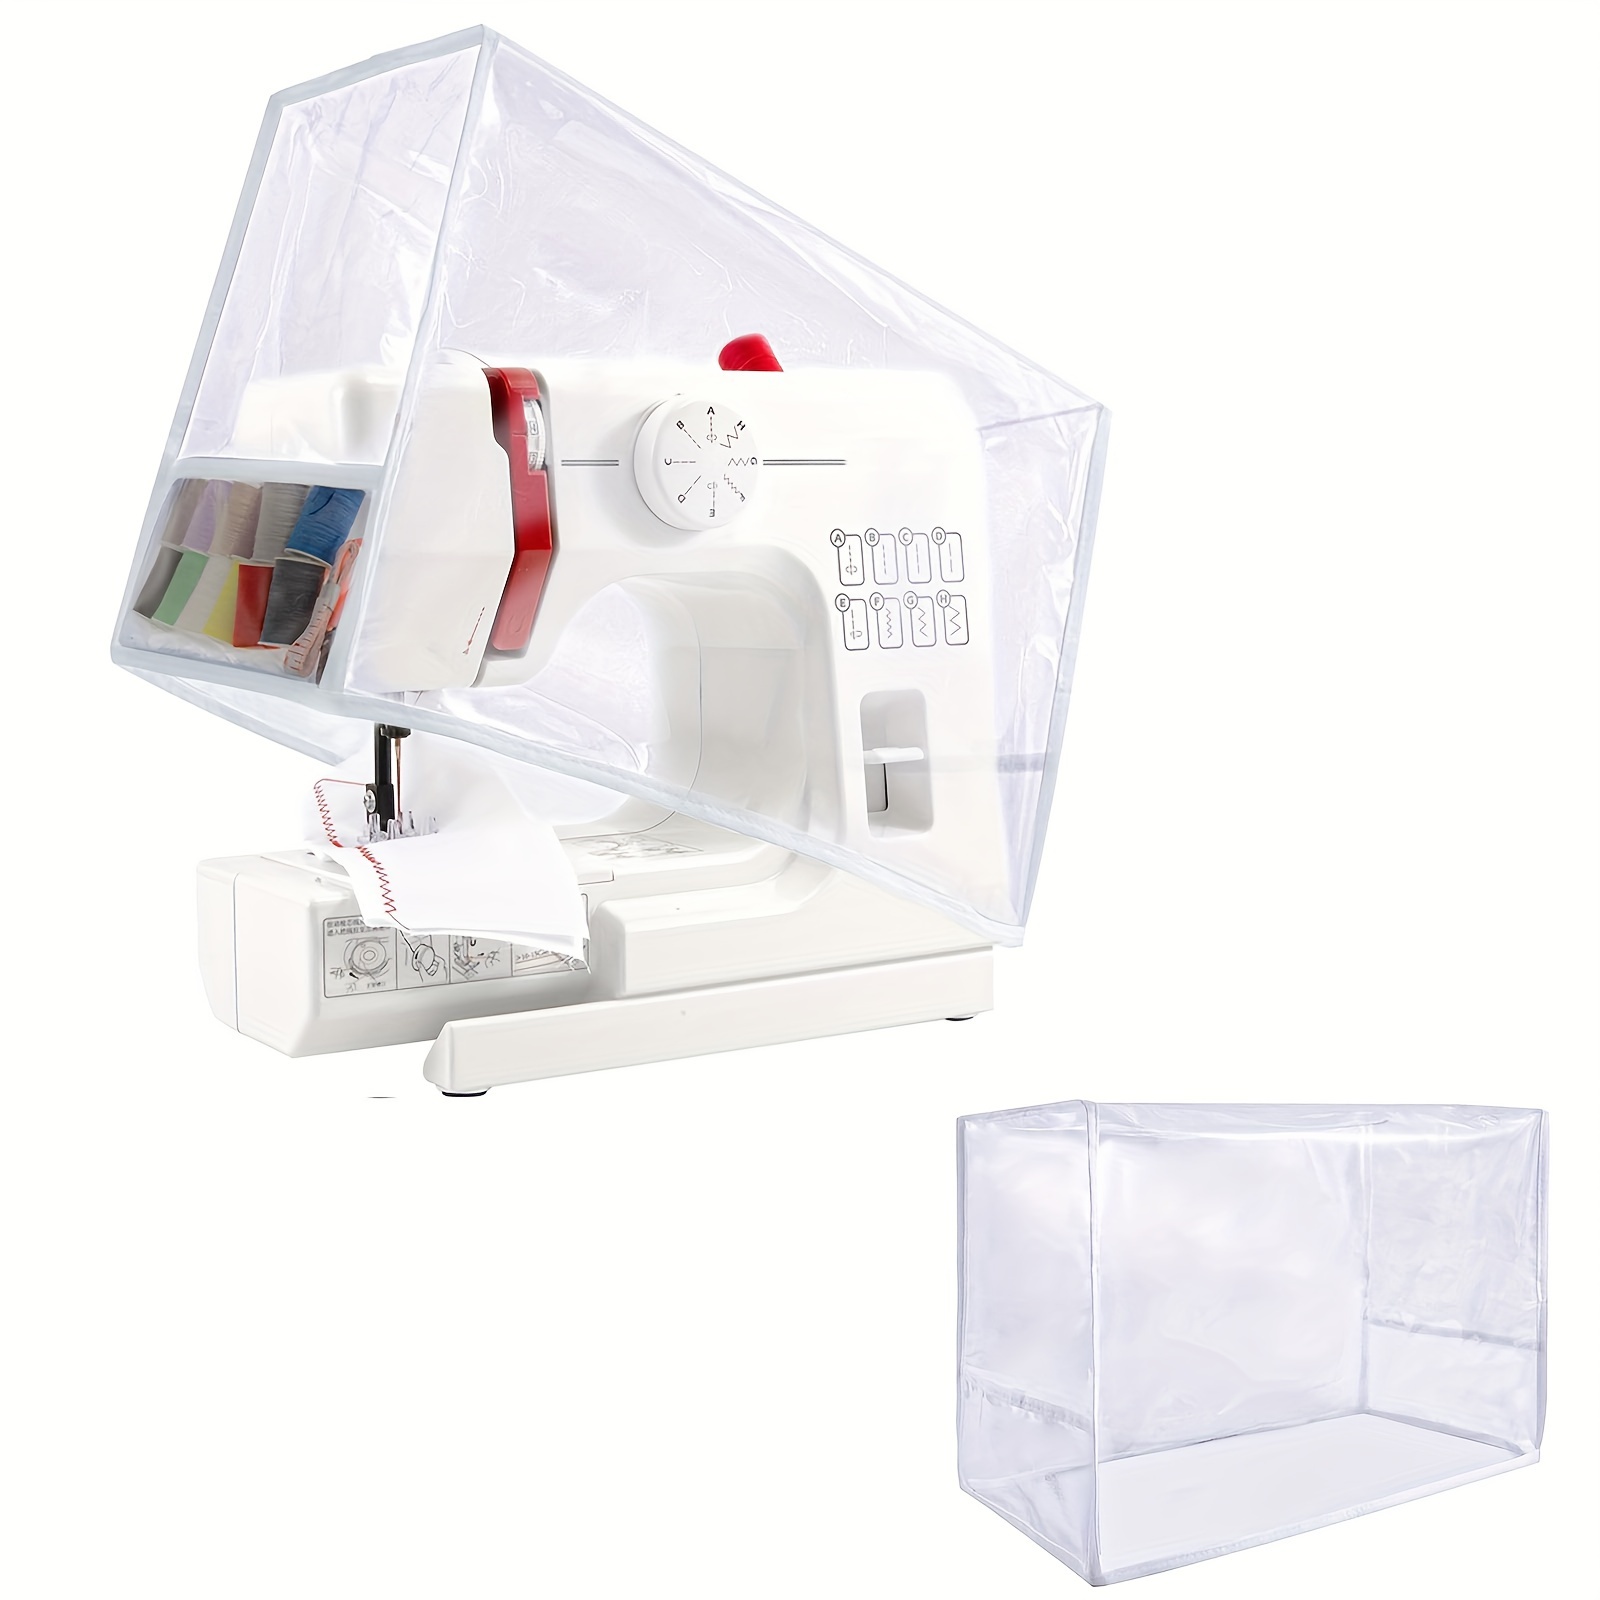 

Clear Sewing Machine Dust Cover With Pockets: Compatible With Most Standard Sewing Machines - Art Storage & Transport - Crafts & Sewing Supplies Storage - Sewing Supplies Organization